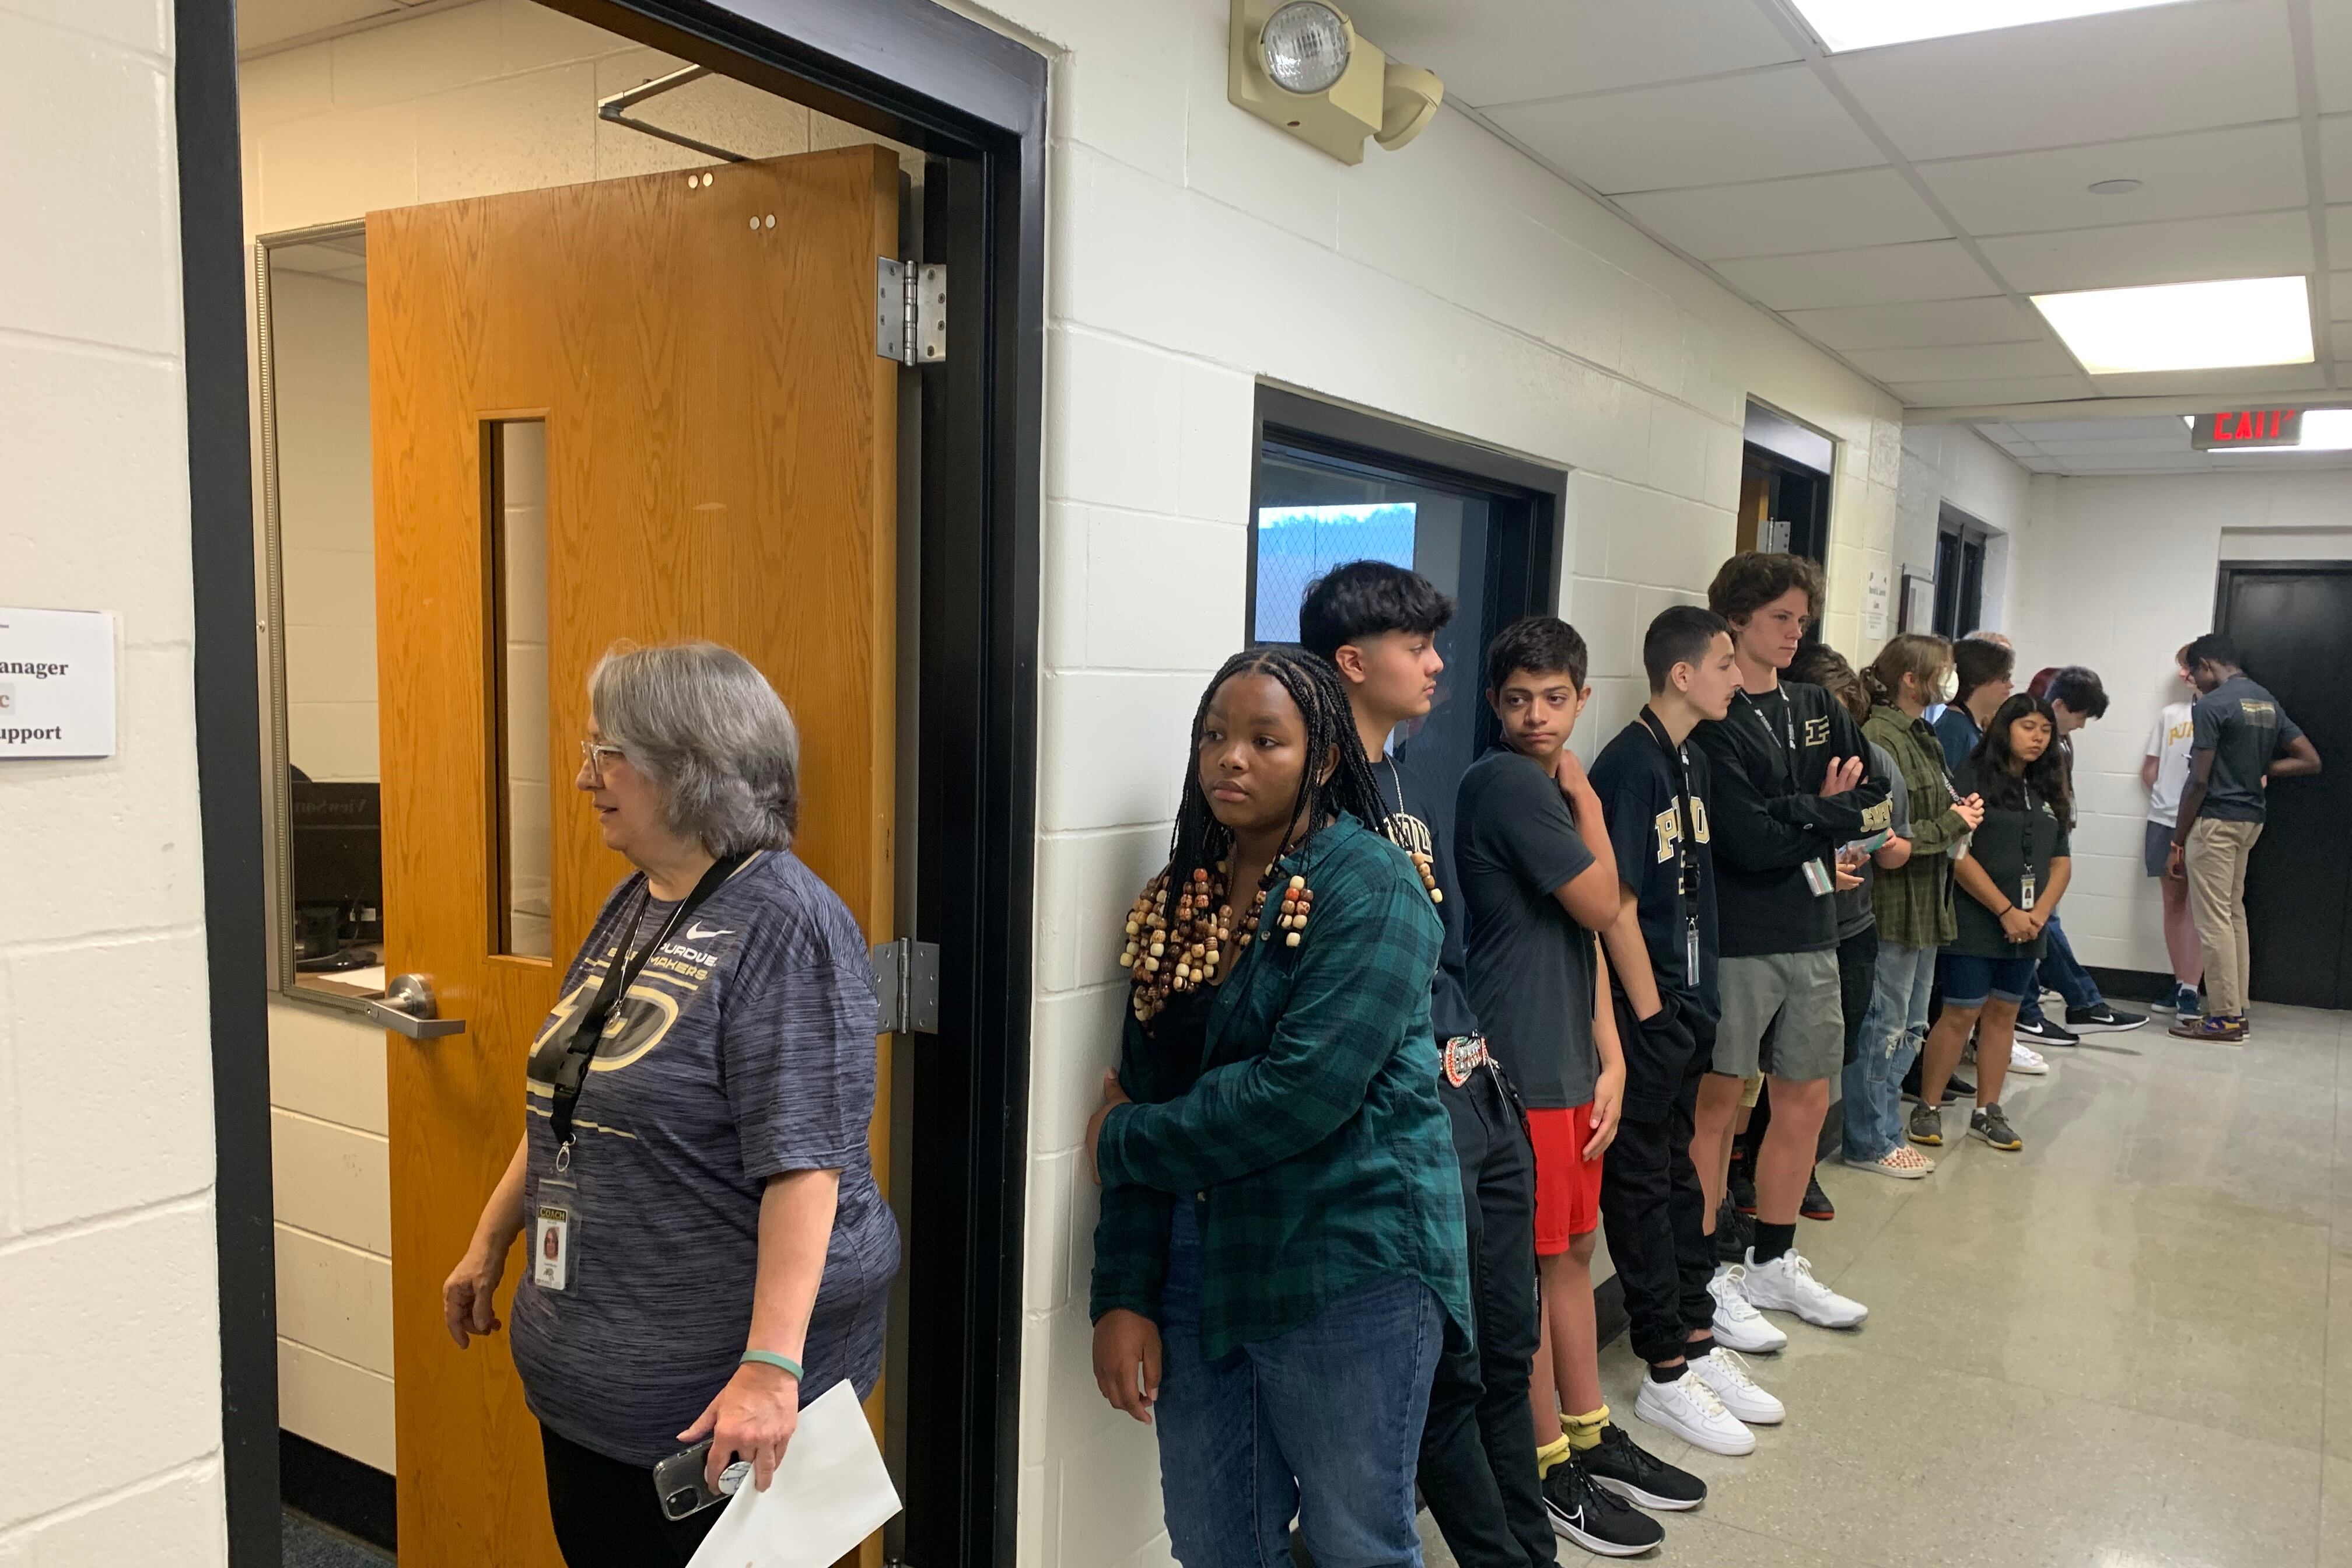 A staff member stands in the doorway next to a long line of high school students.